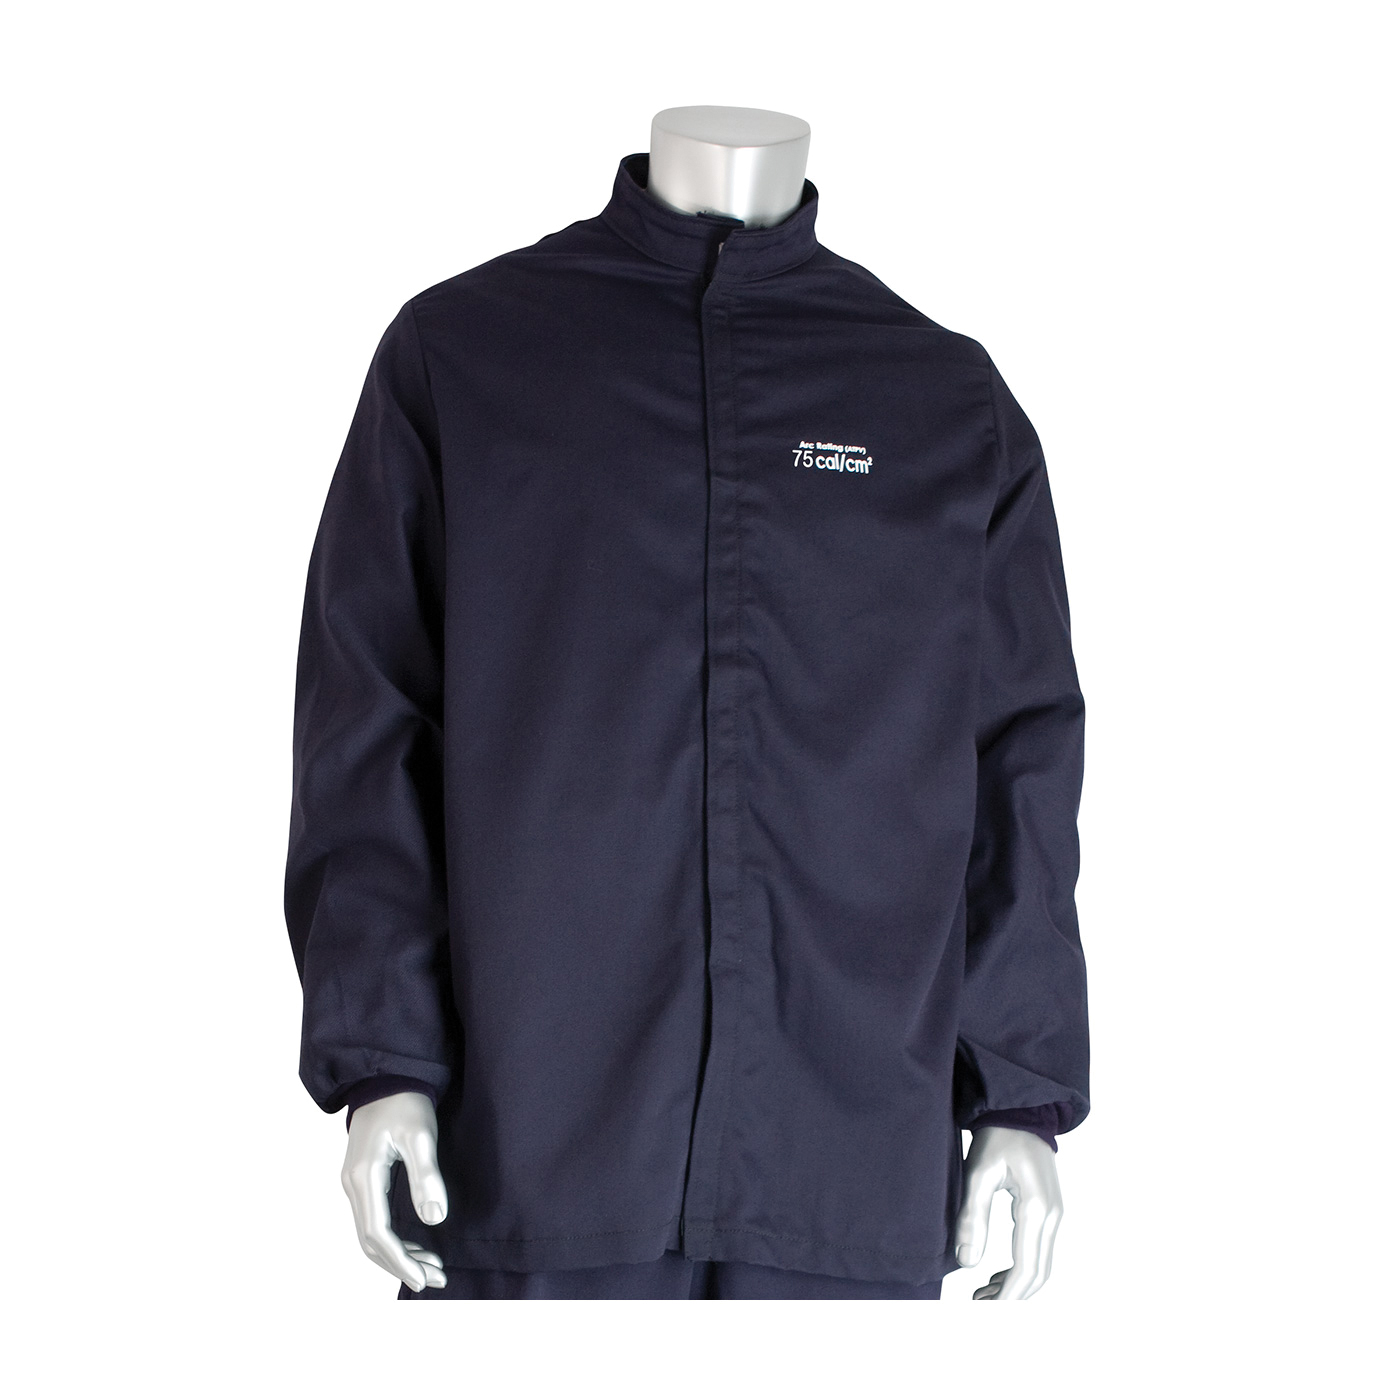 PIP® 9100-75000/4X Arc and Flame Resistant Jacket, 4XL, Navy, Westex® UltraSoft® 88% Cotton 12% High Tenacity Nylon, 60 to 62 in Chest, Resists: Arc and Flame, ASTM F1506-10a, ASTM F2178-12